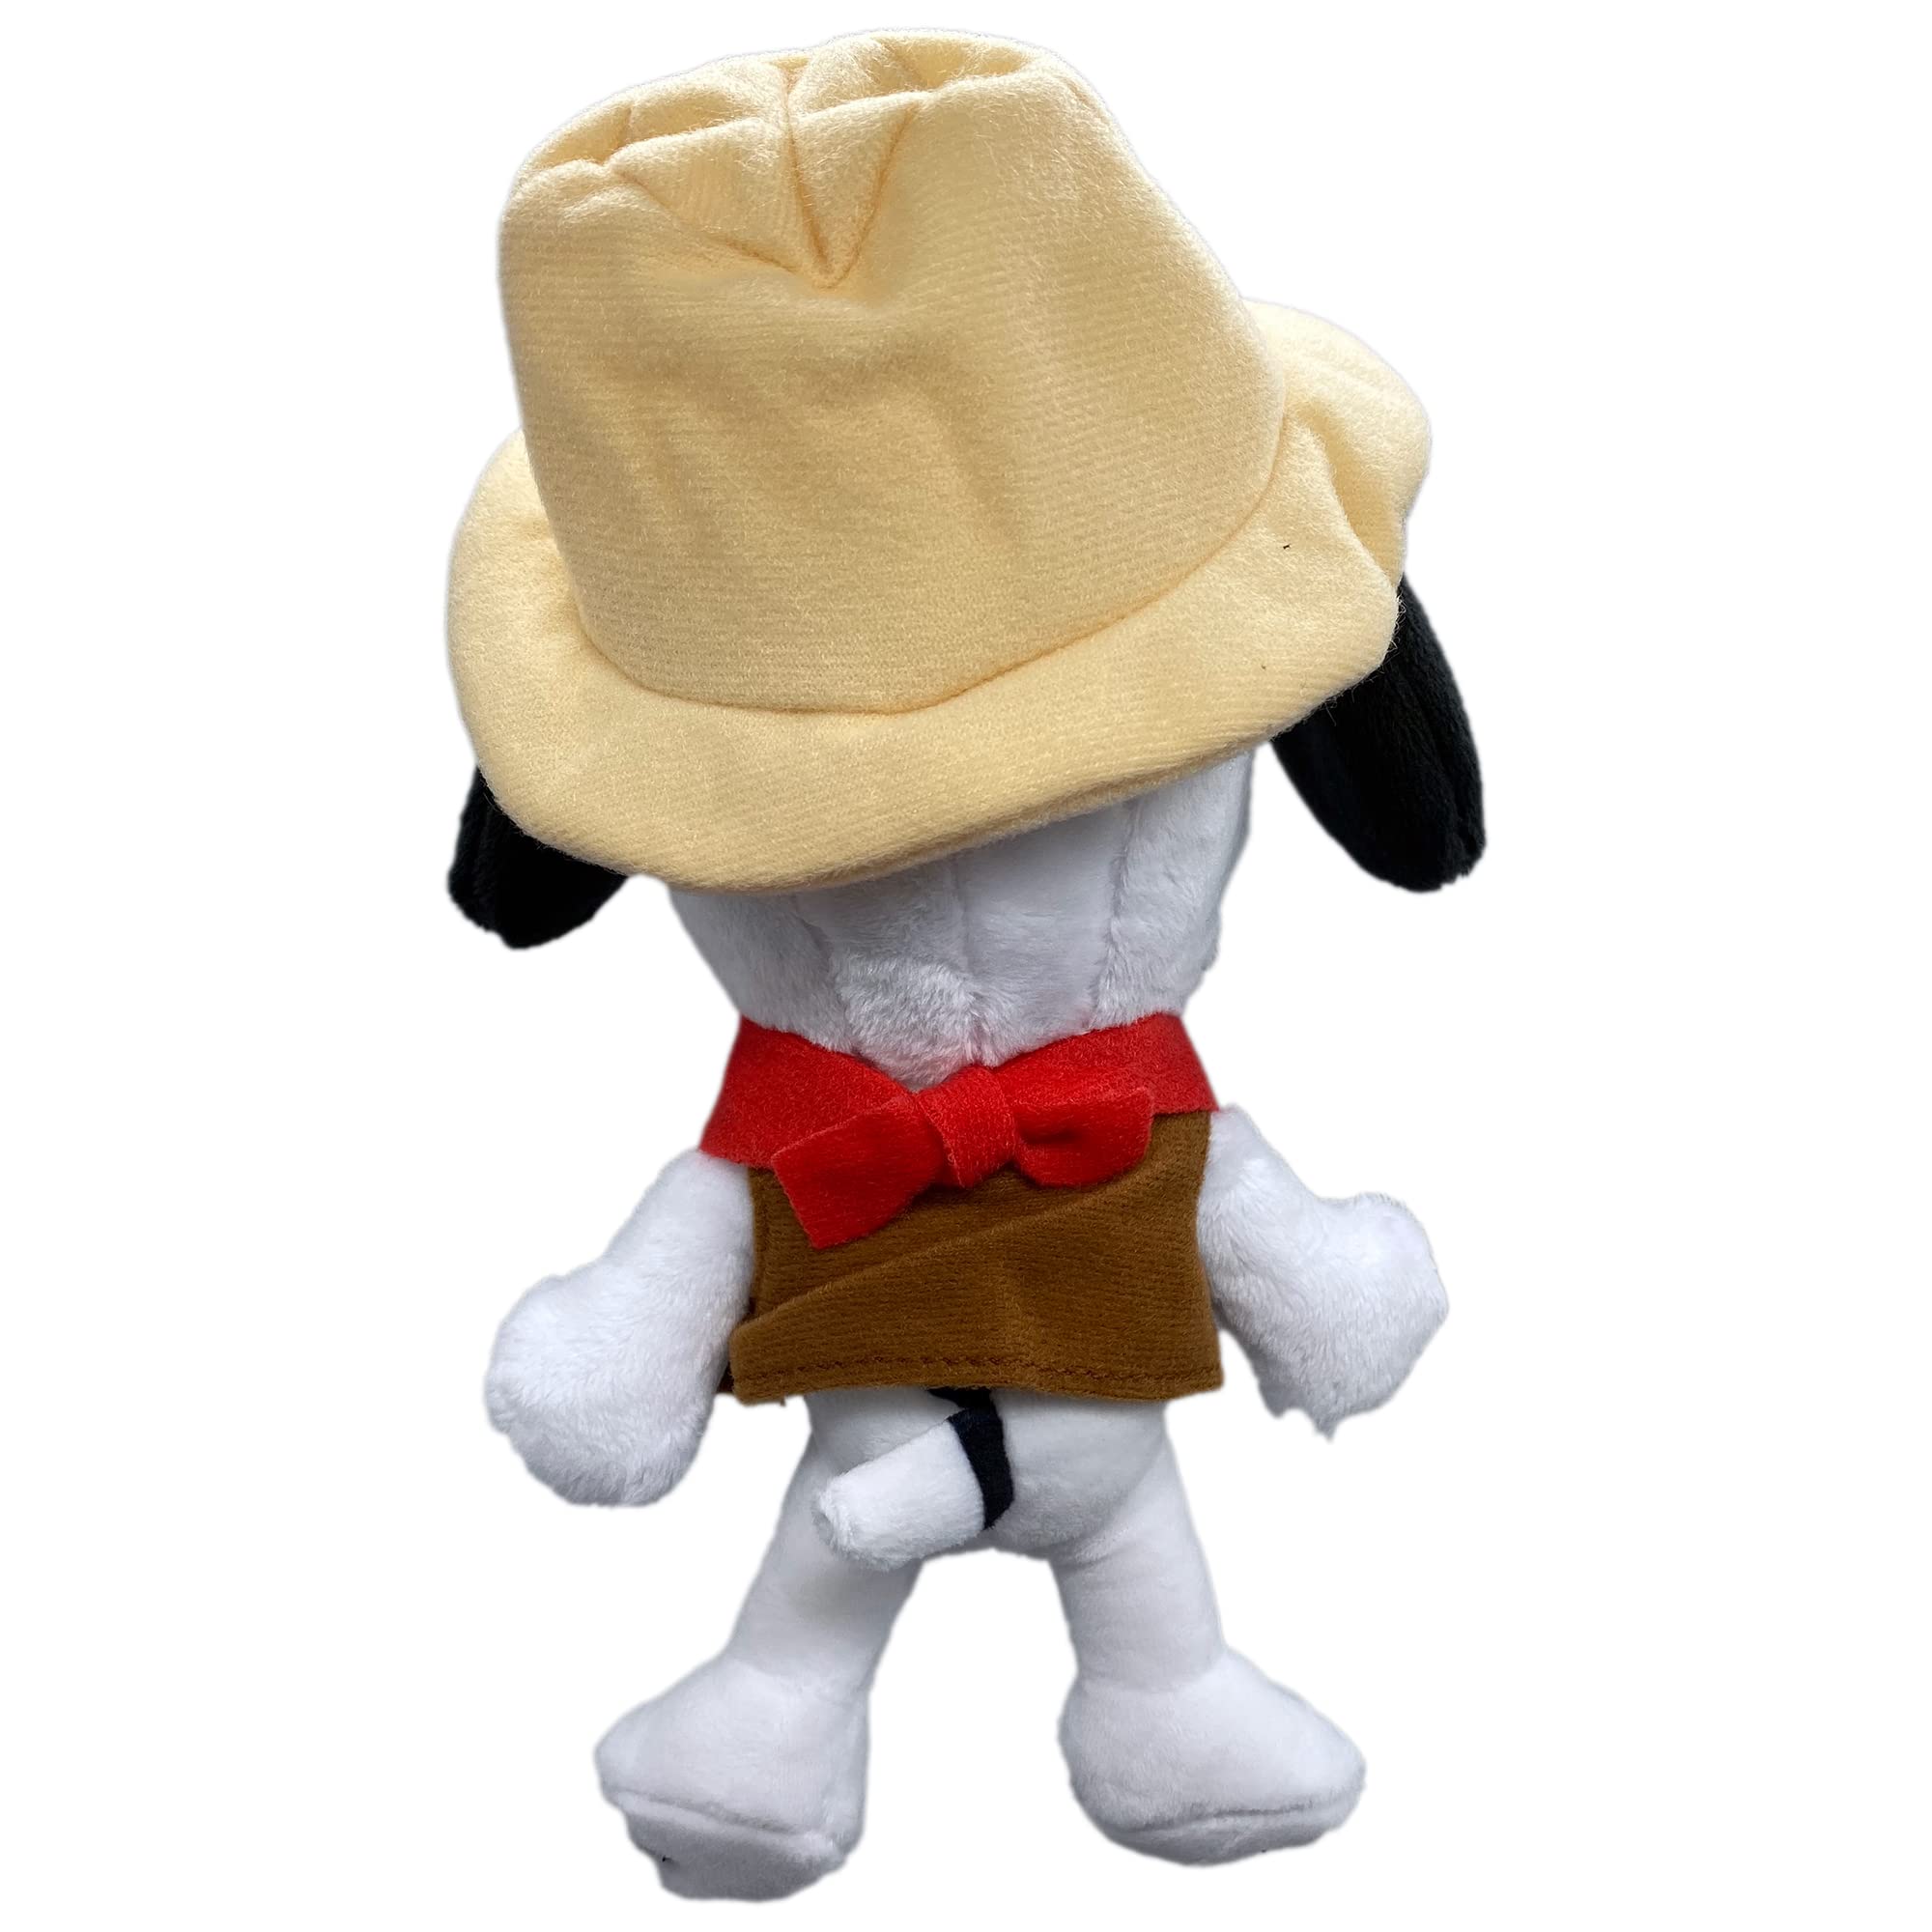 JINX Official Peanuts Collectible Plush Snoopy Cowboy, Excellent Plushie for Toddlers & Preschool